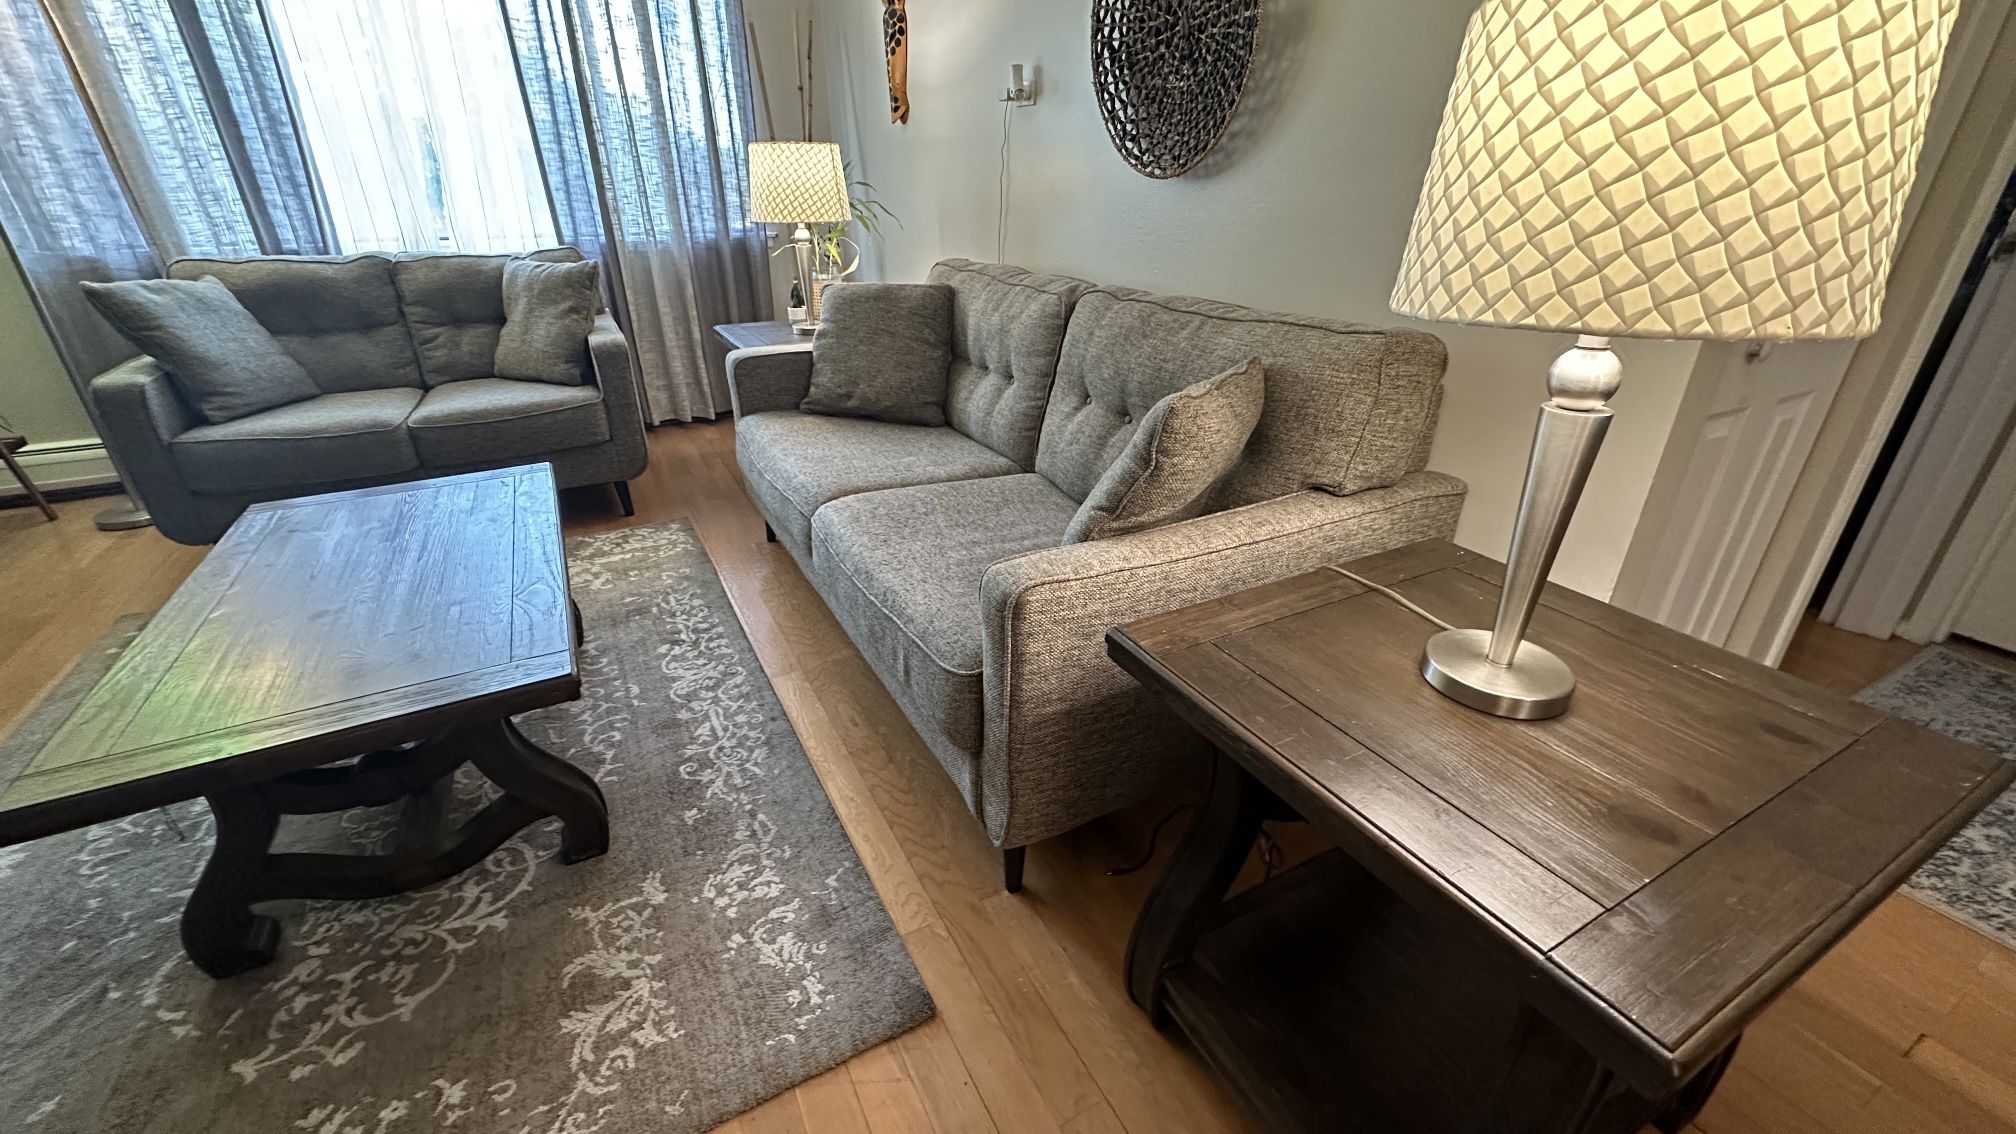 Sofa And Loveseat With Tables; And A FREE rug! Moving Help Is Available!